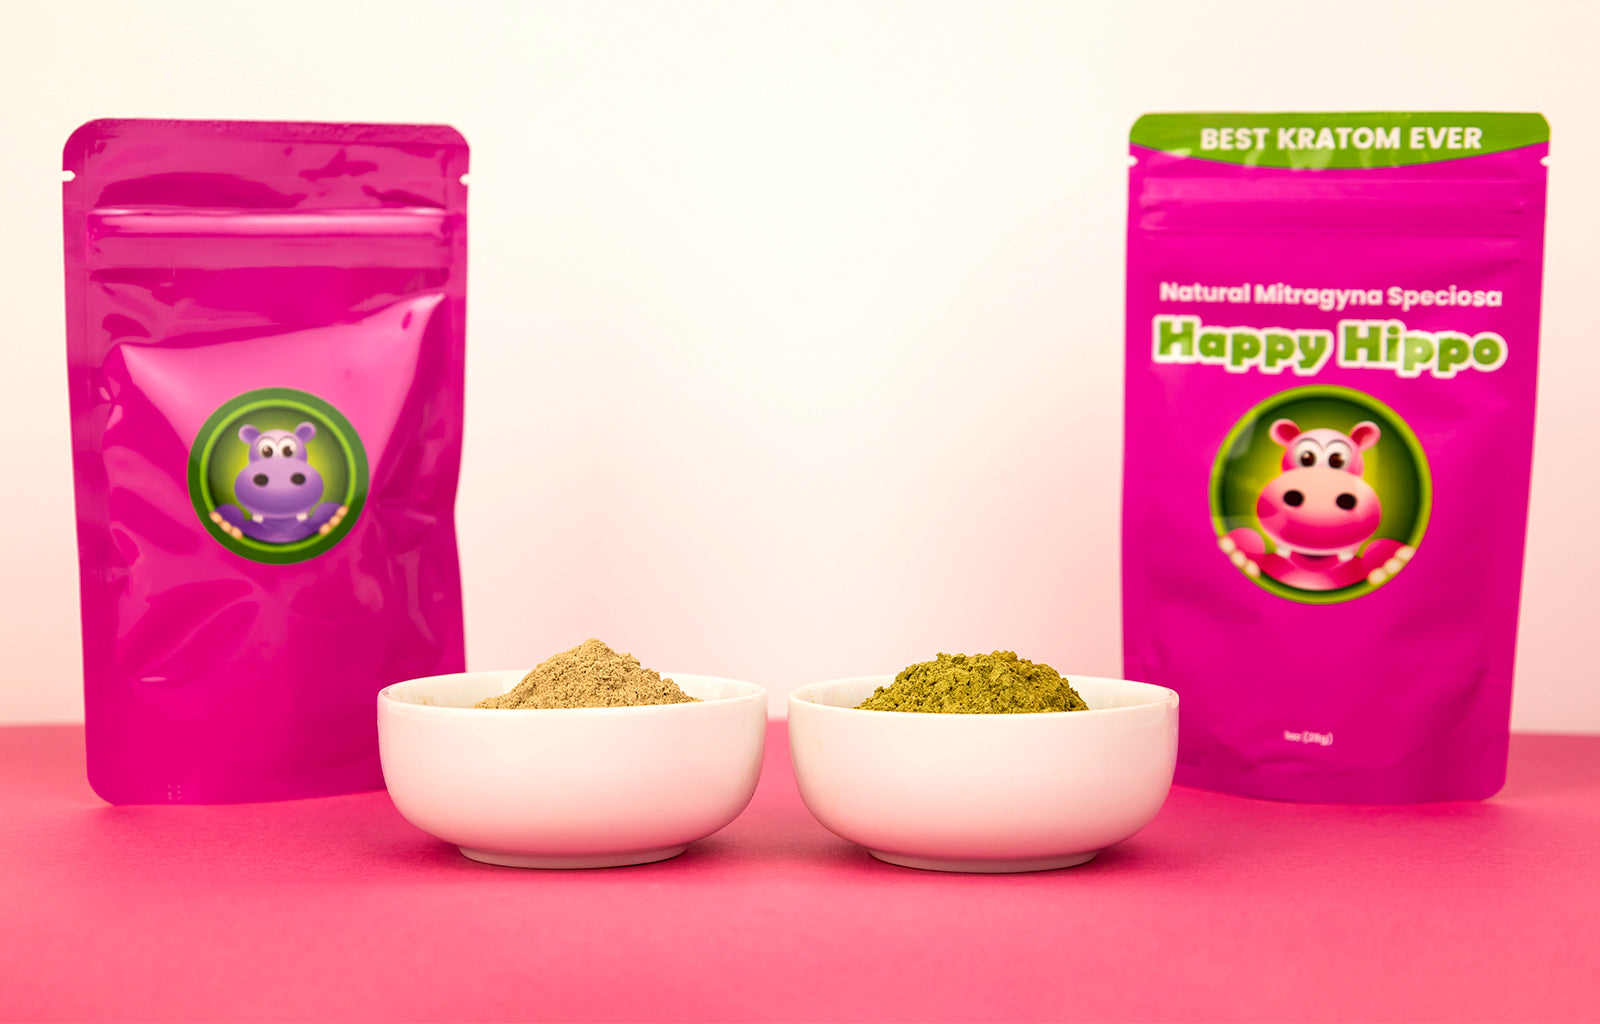 Featured Image depicting dueling packets of Happy Hippo Branded Fijian Waka Kava Powder on the left, and a packet of Green Maeng Da Kratom Powder on the Right. A White bowl containing loose powder sits in front of each amazing botanical.